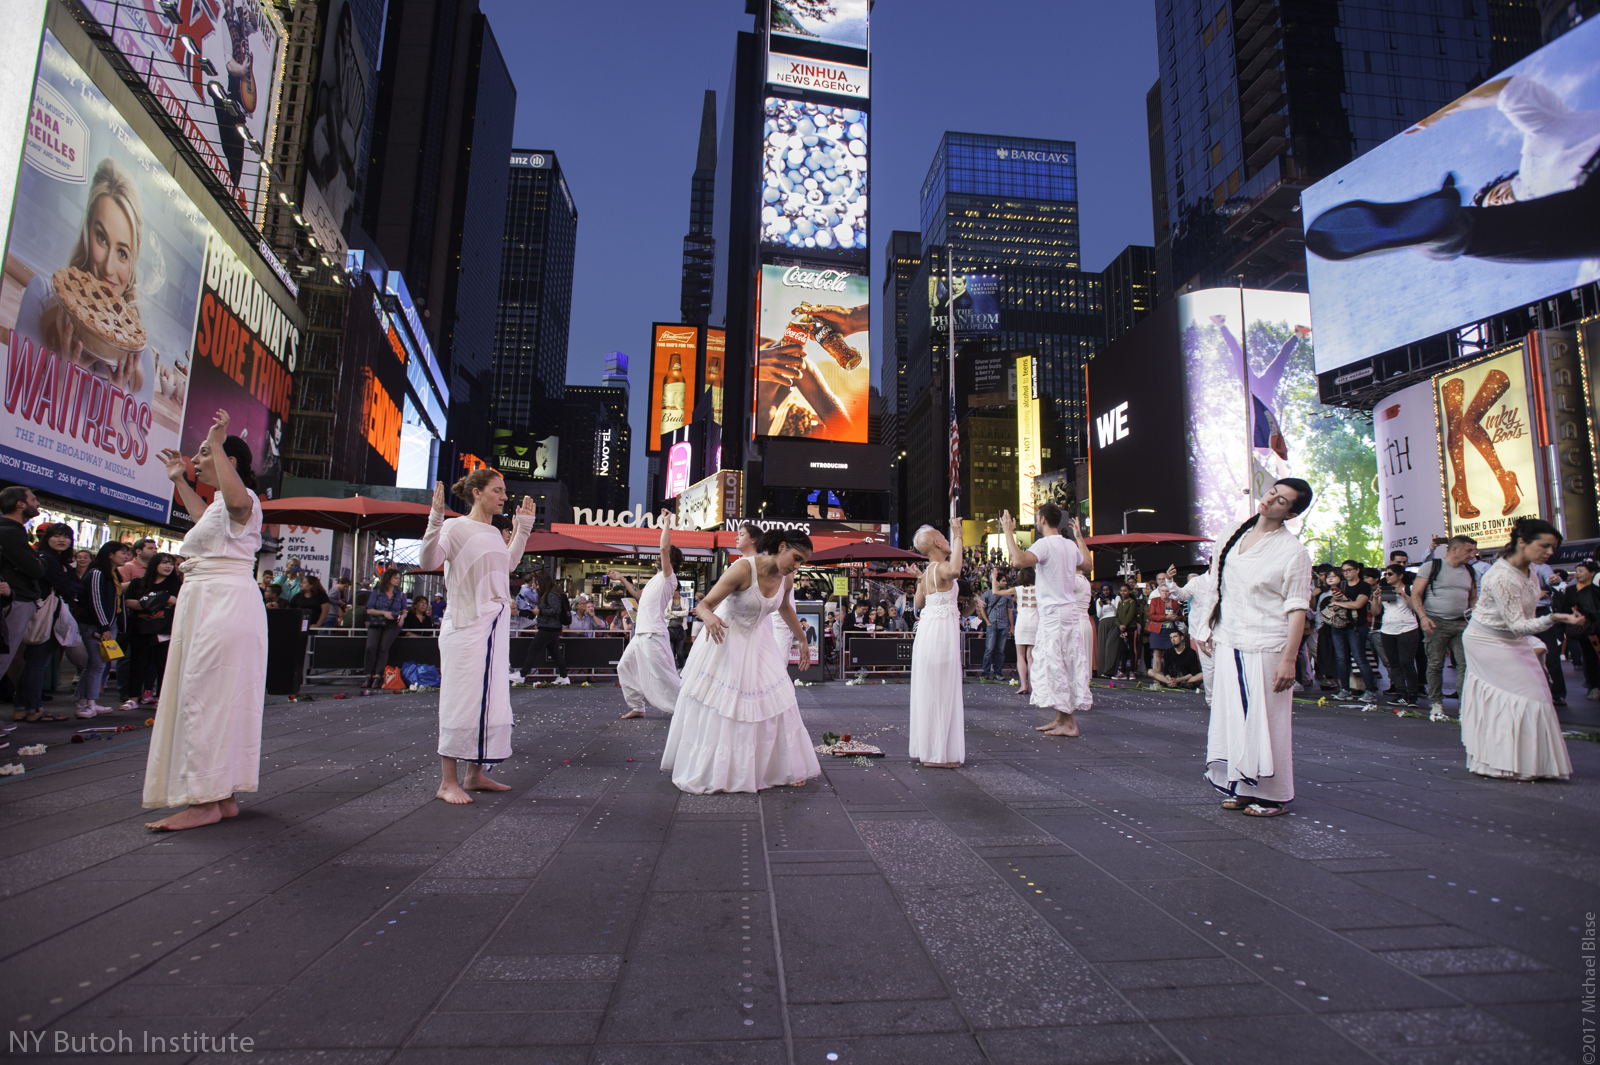 9/11 Commemoration- September 11, 2017. Butoh performance in Times Square with Vangeline Theater and students.